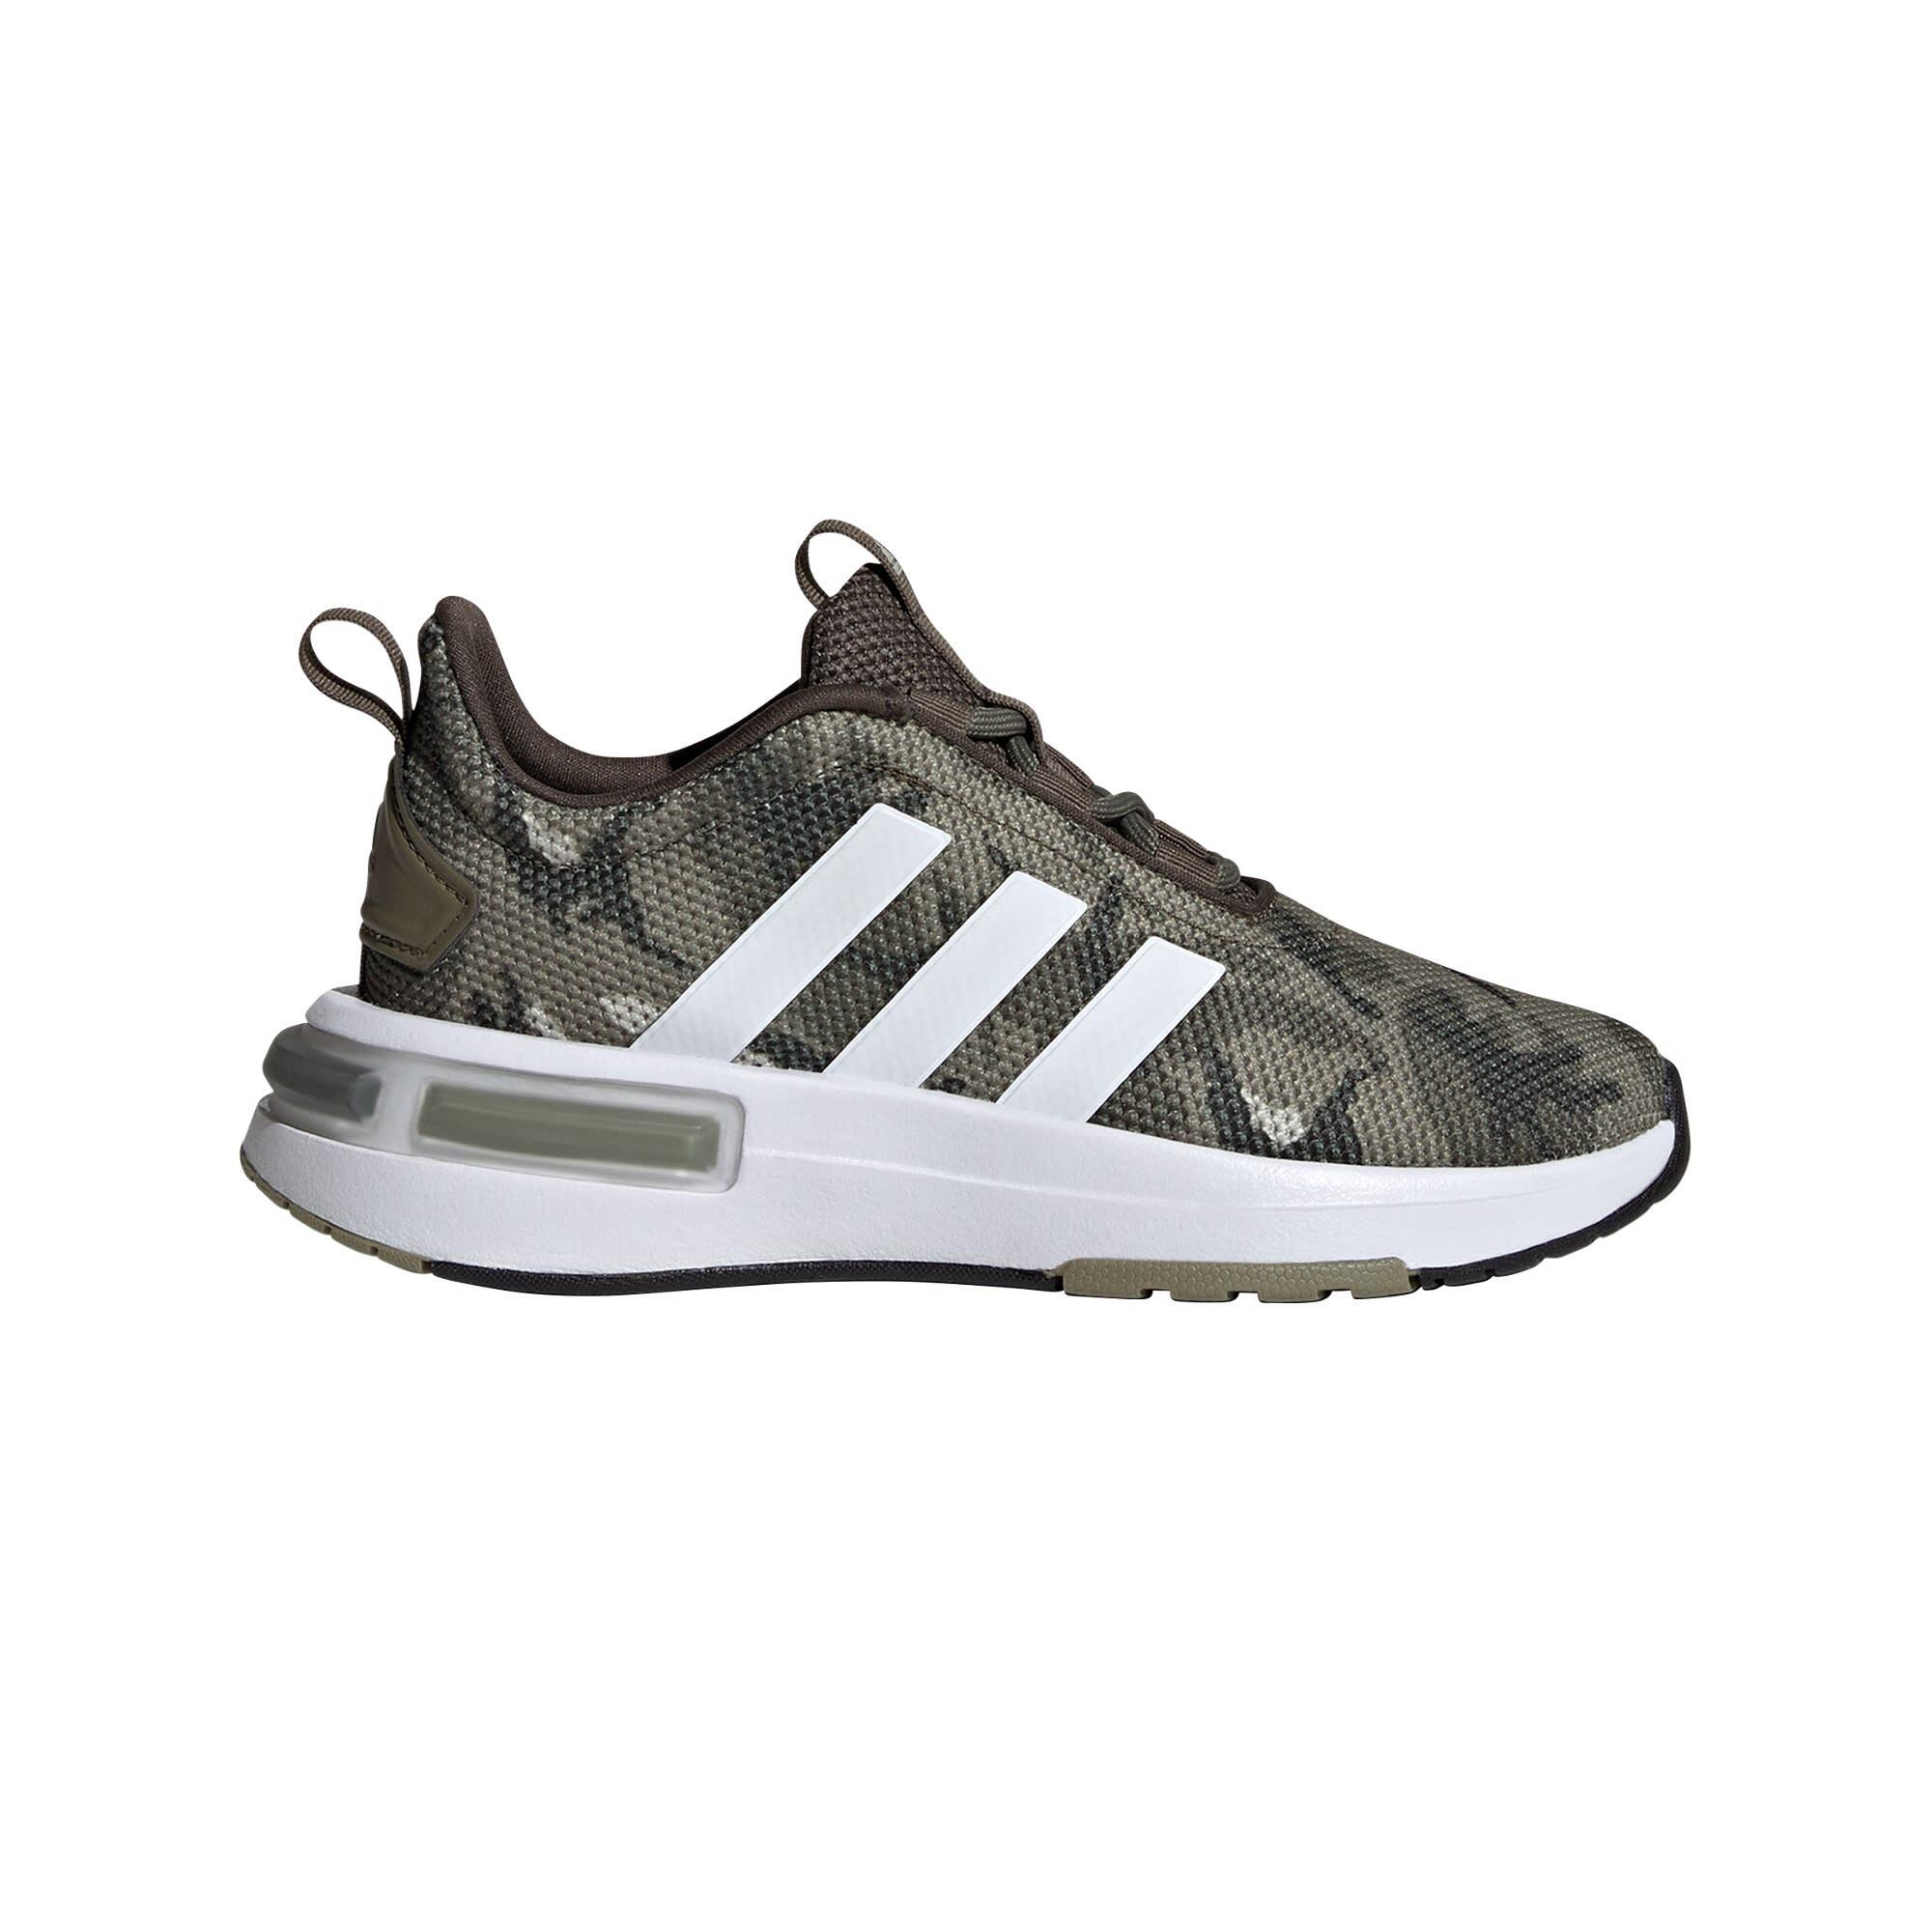 ADIDAS Racer TR23 Shoes Kids